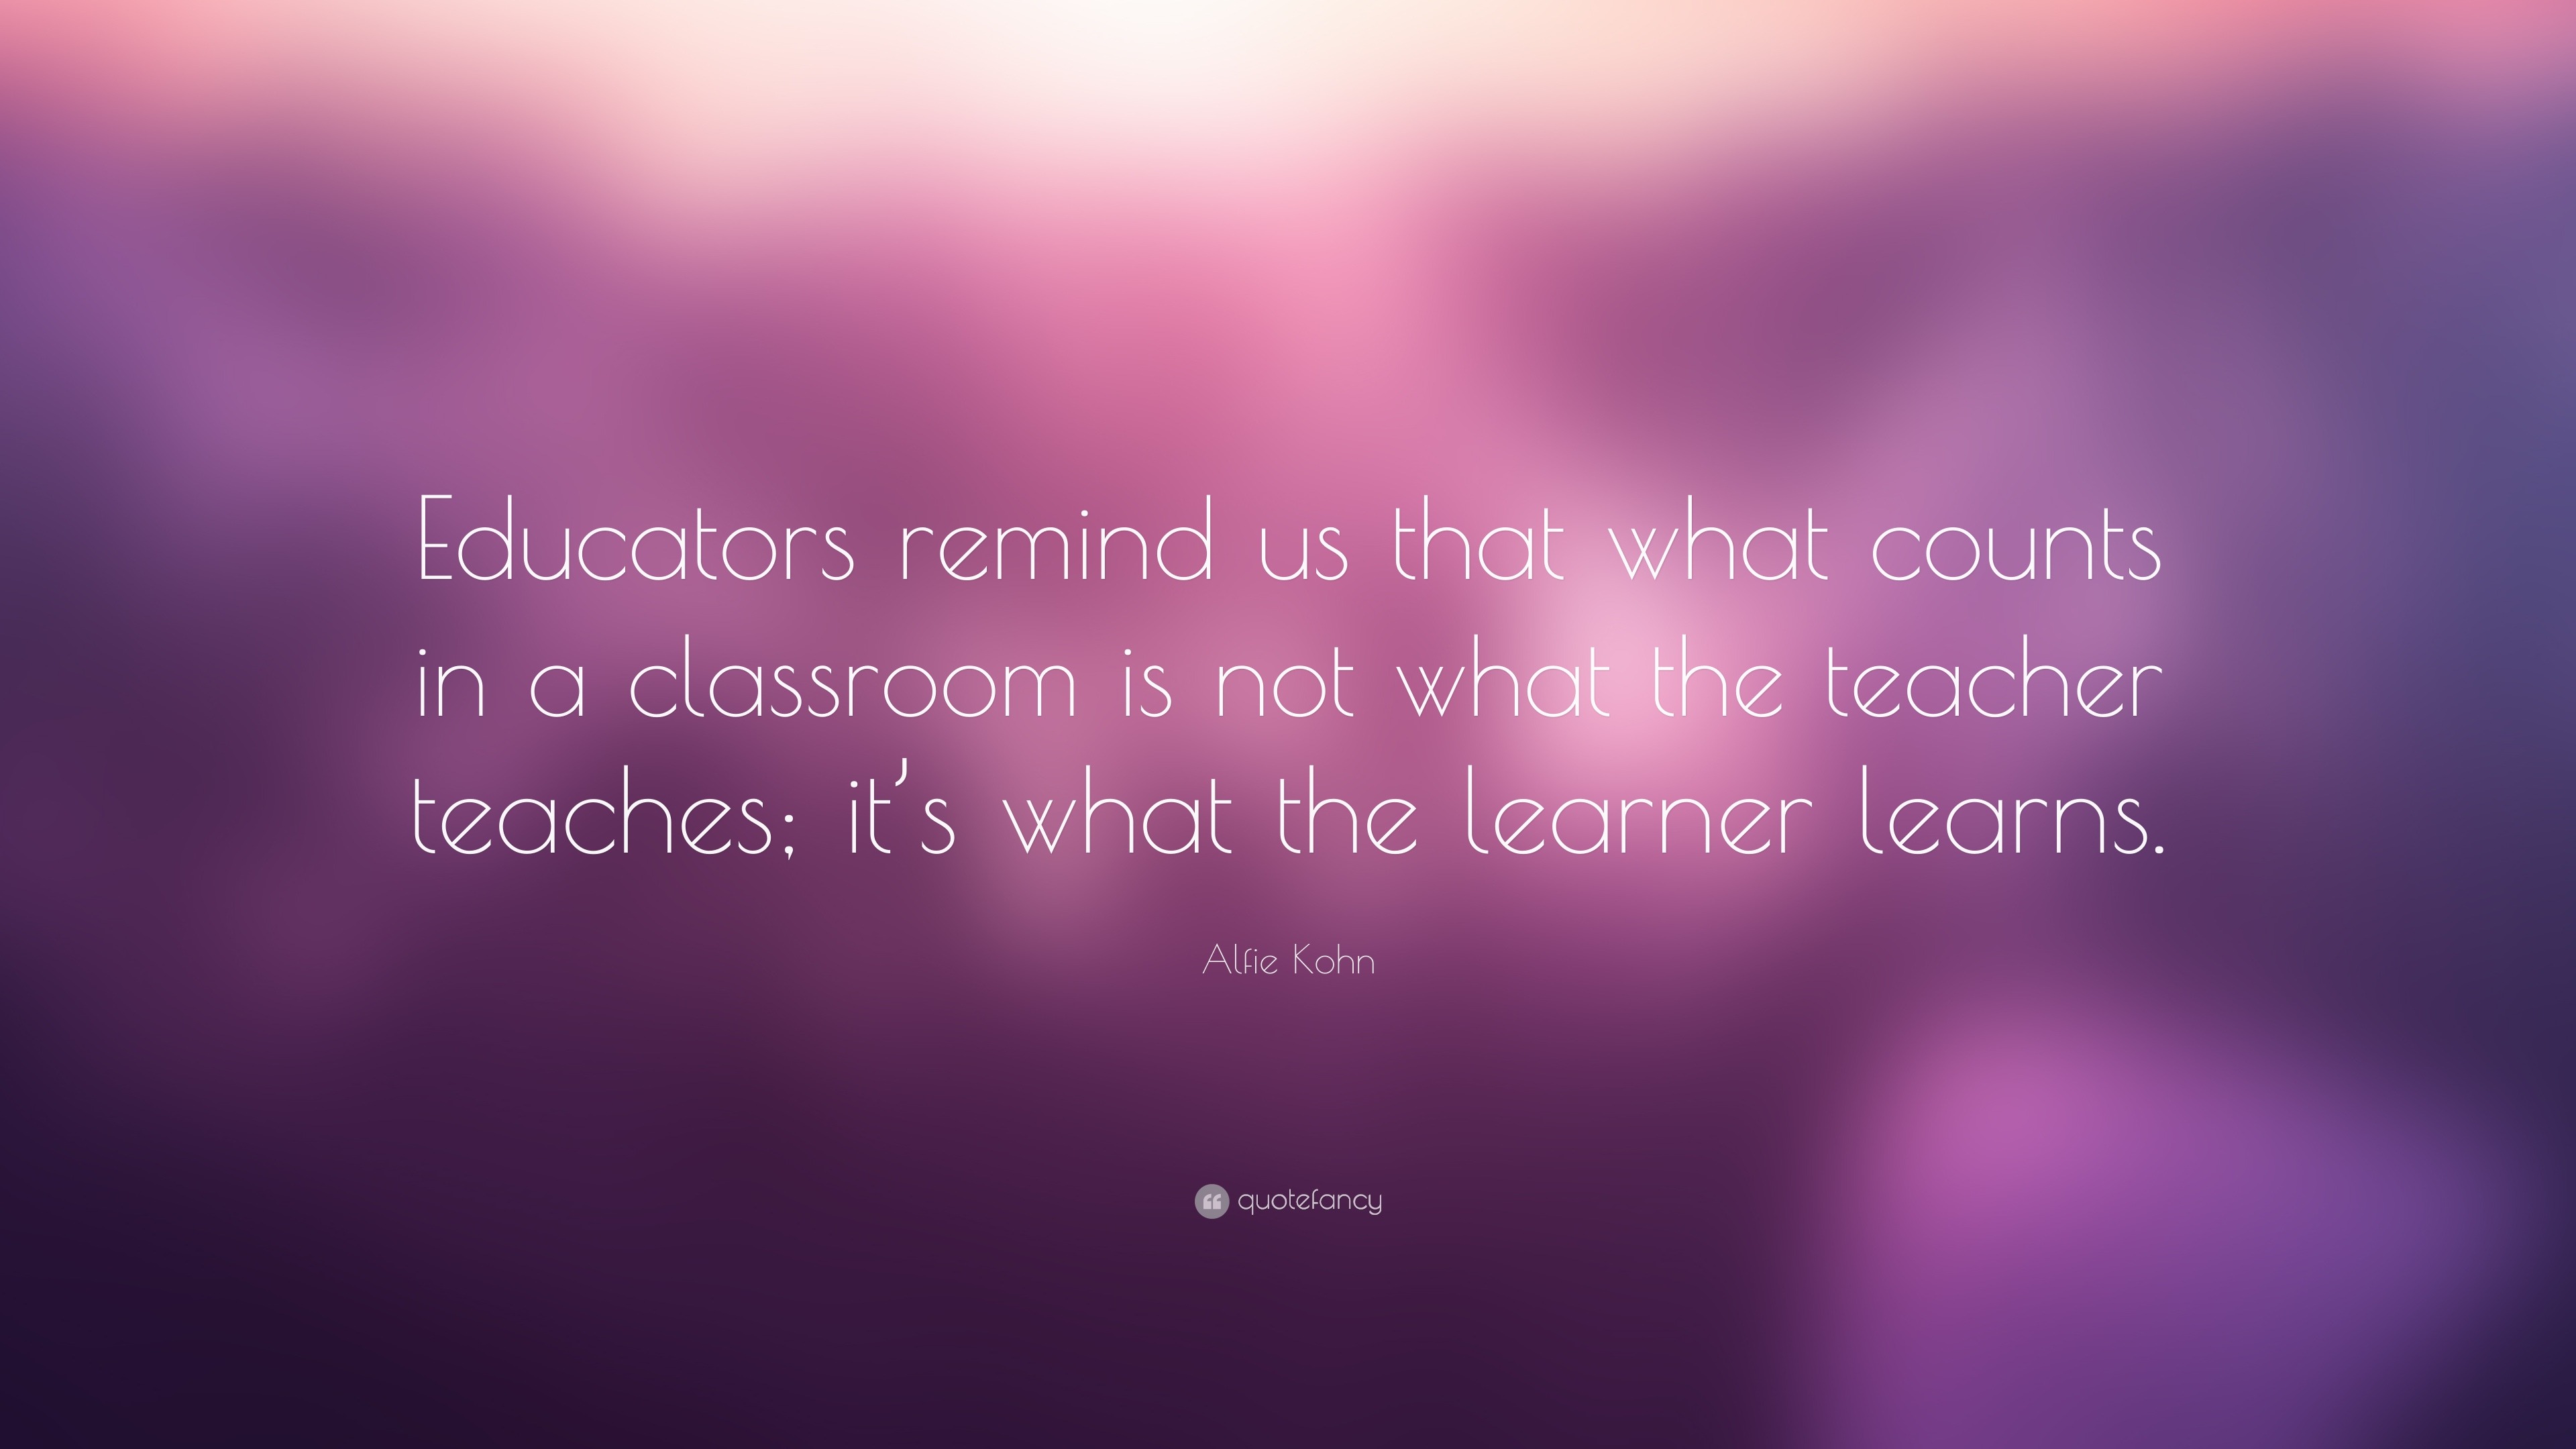 Alfie Kohn Quote: “Educators remind us that what counts in a classroom ...